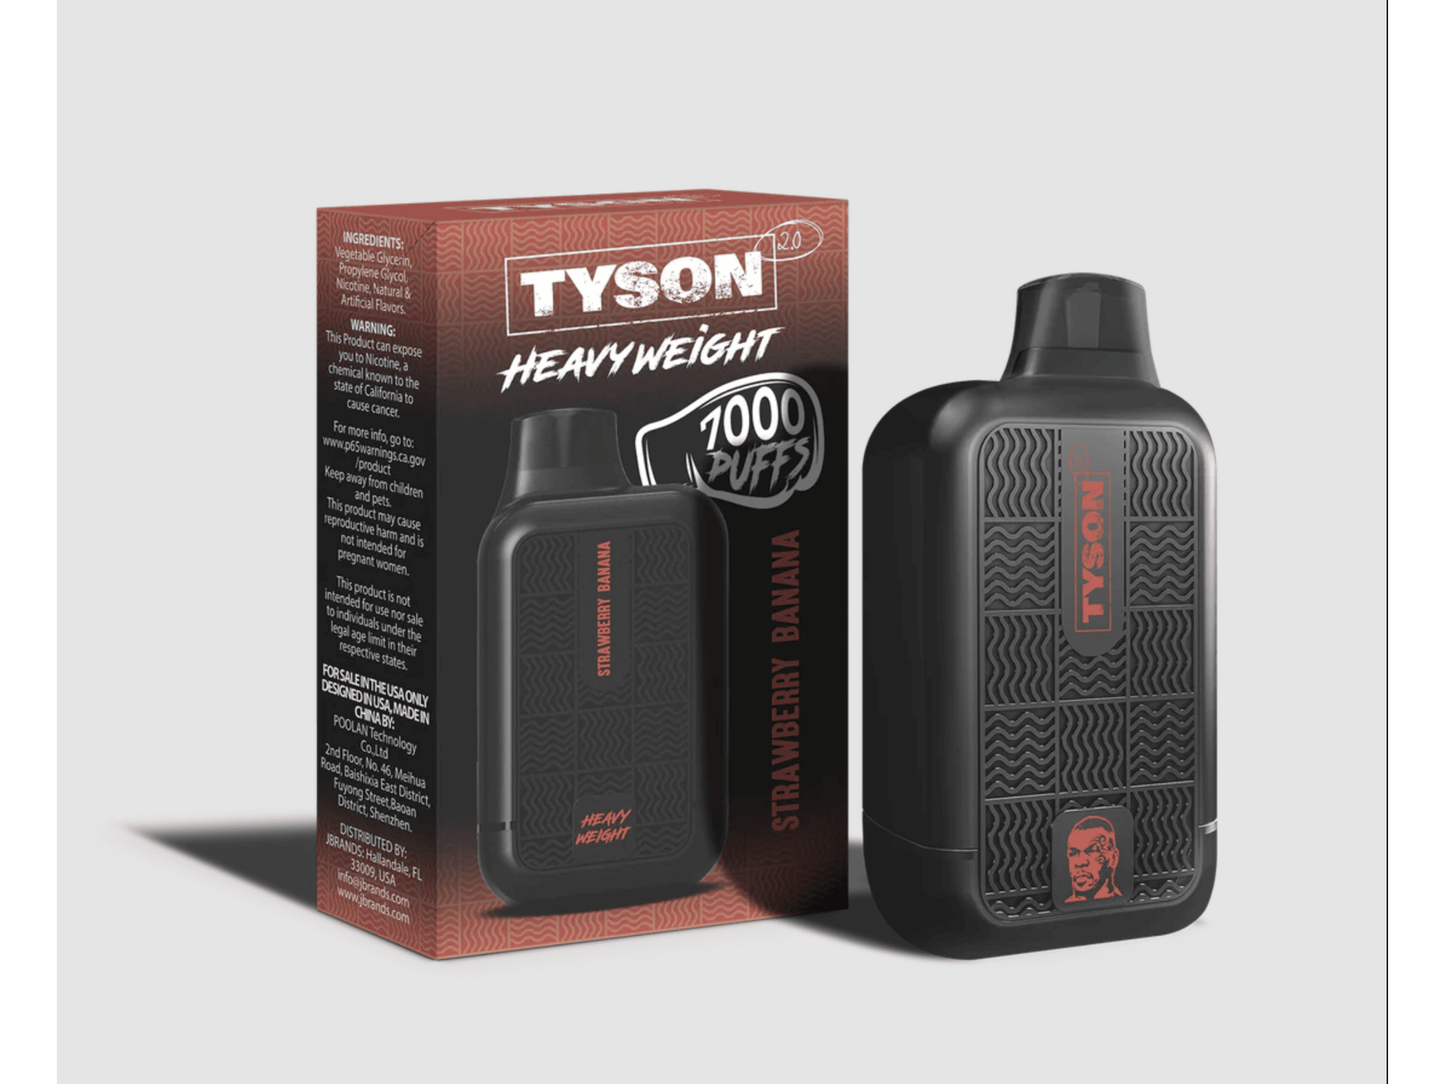 Tyson Heavyweight Strawberry Banana flavored disposable vape device and box.